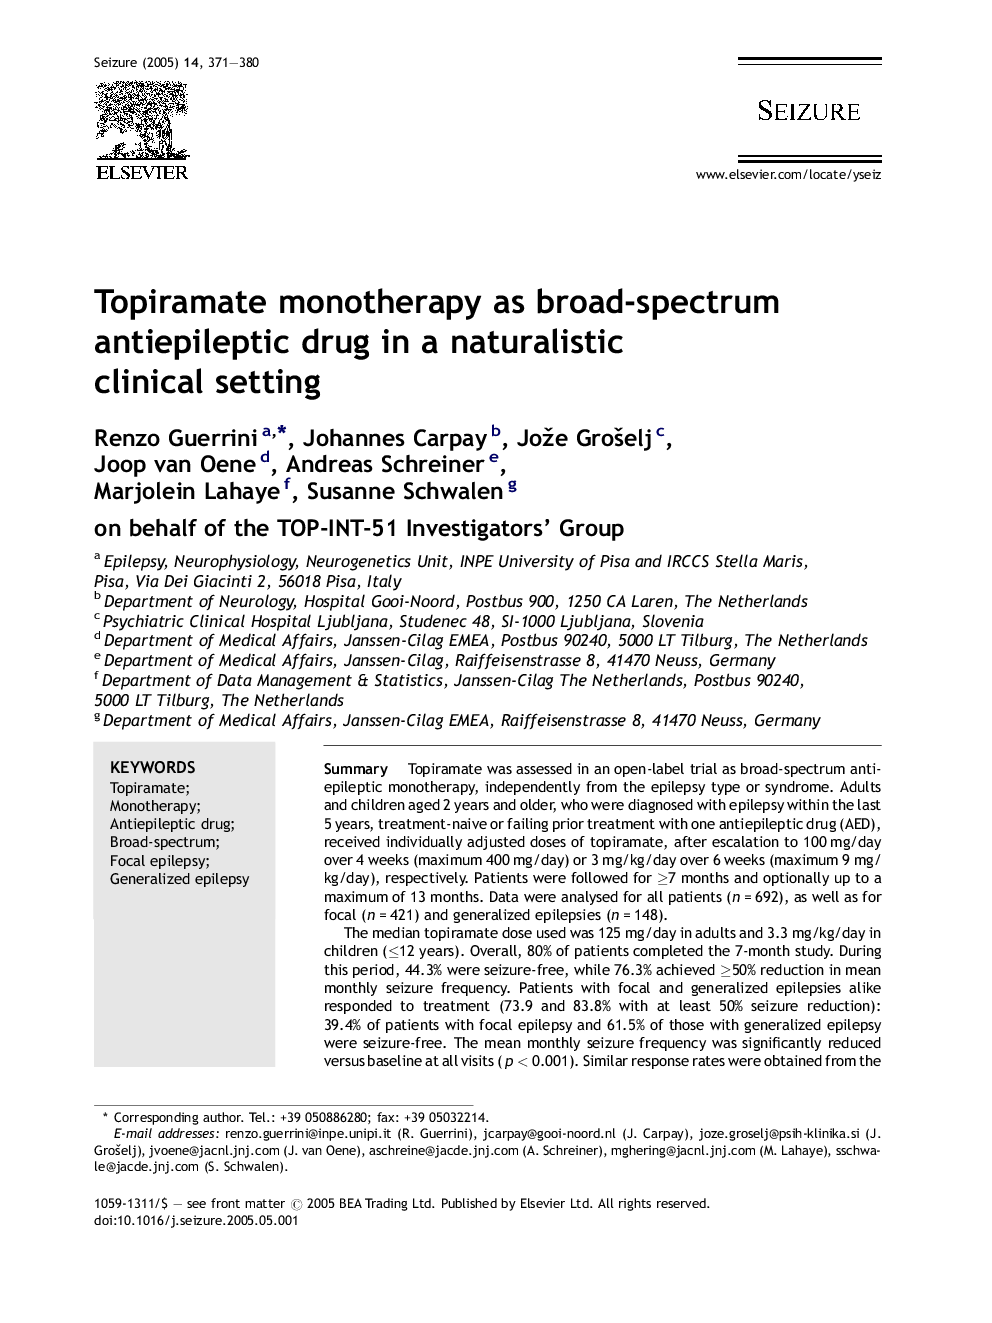 Topiramate monotherapy as broad-spectrum antiepileptic drug in a naturalistic clinical setting